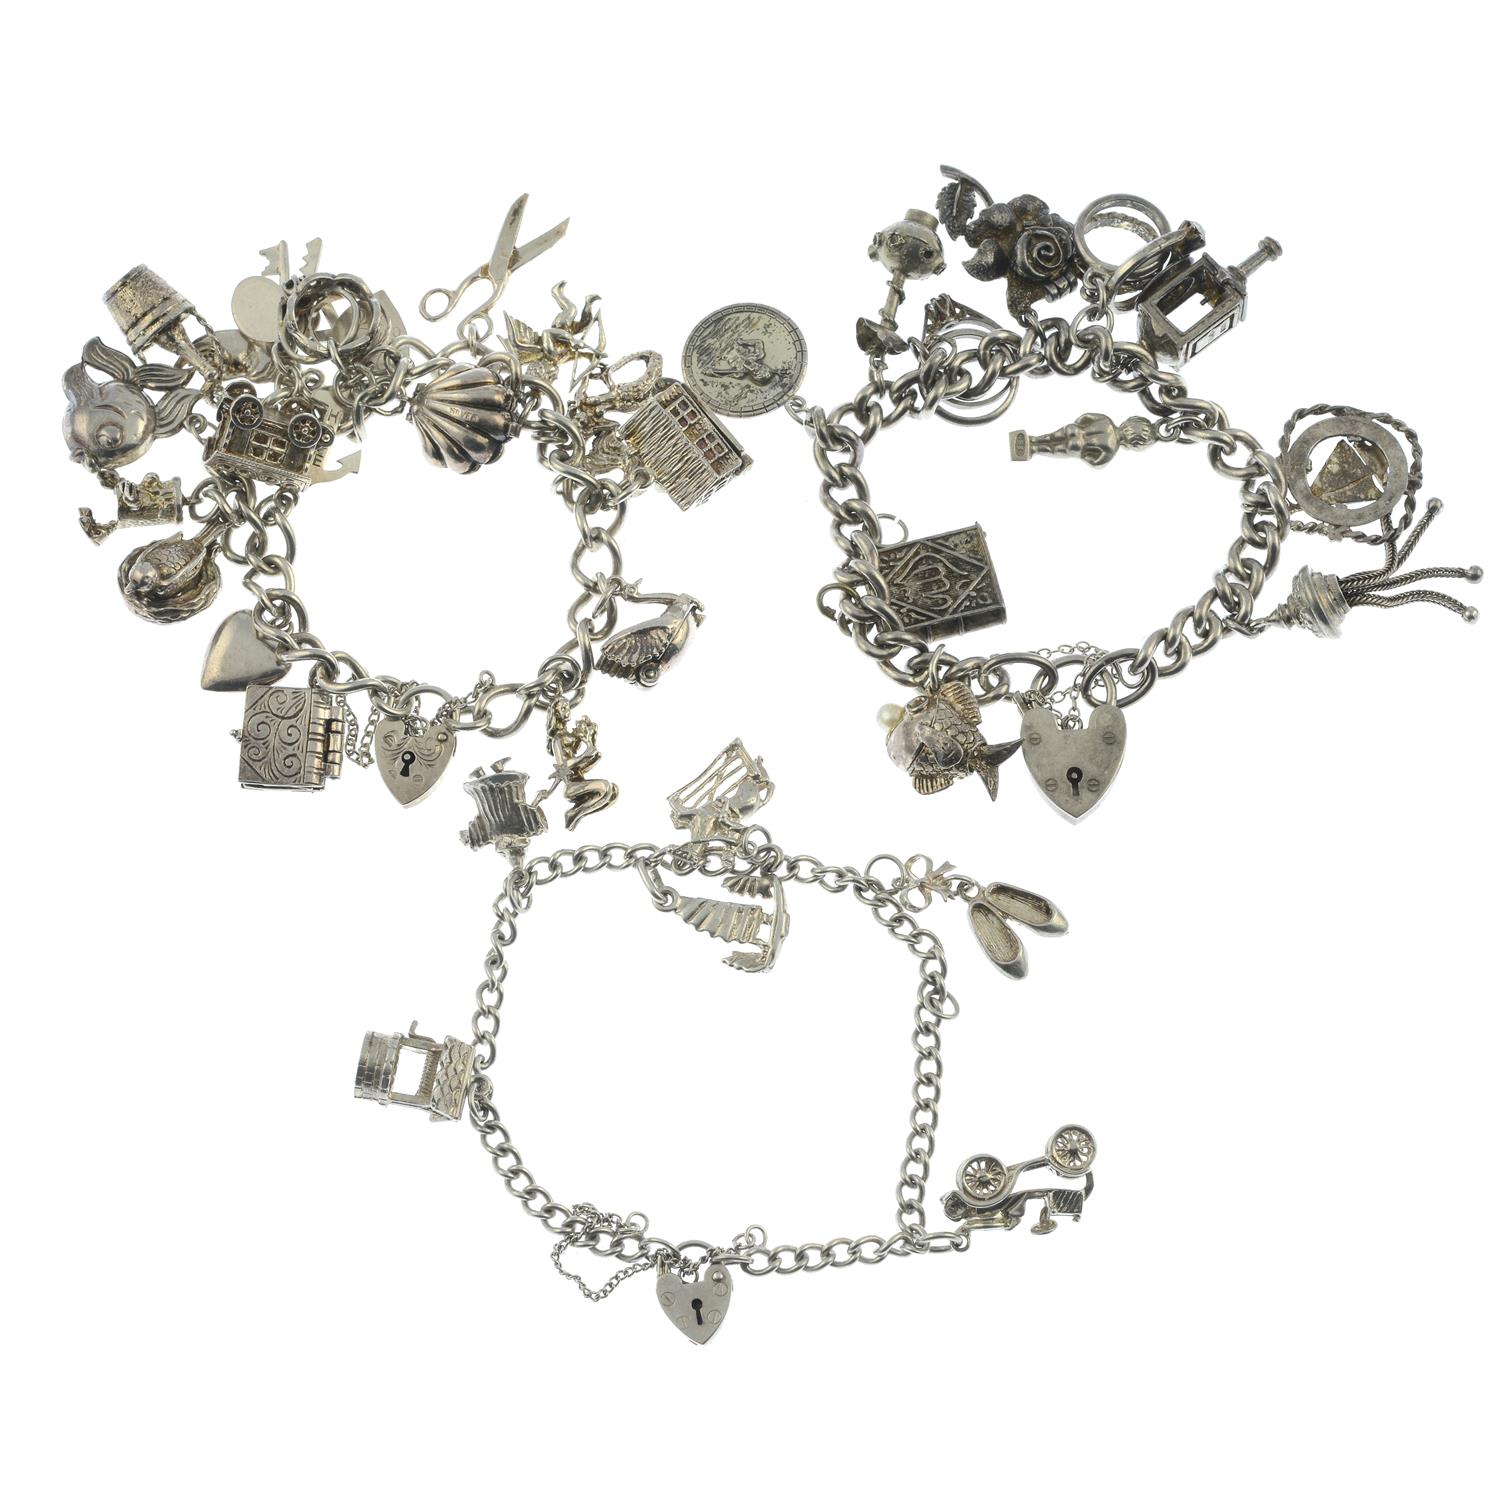 Two silver charm bracelets and a further charm bracelet, with a variety of charms.